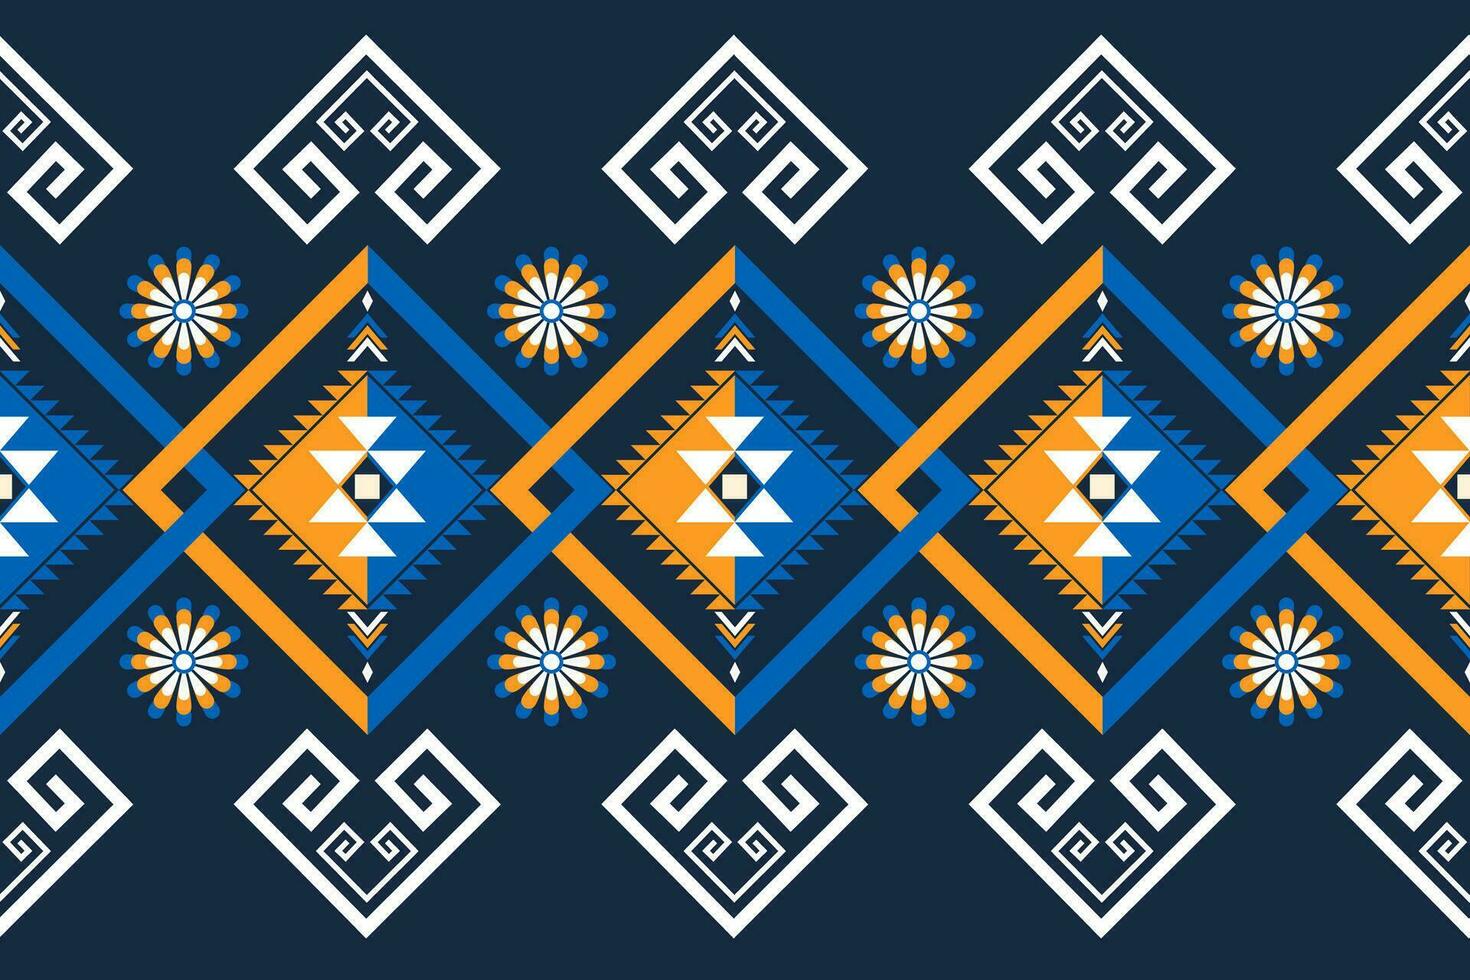 ethnic geometric seamless pattern. Geometric dark blue background. Design for fabric, clothes, decorative paper, wrapping, embroidery, illustration, vector, batik pattern, ethnic pattern vector